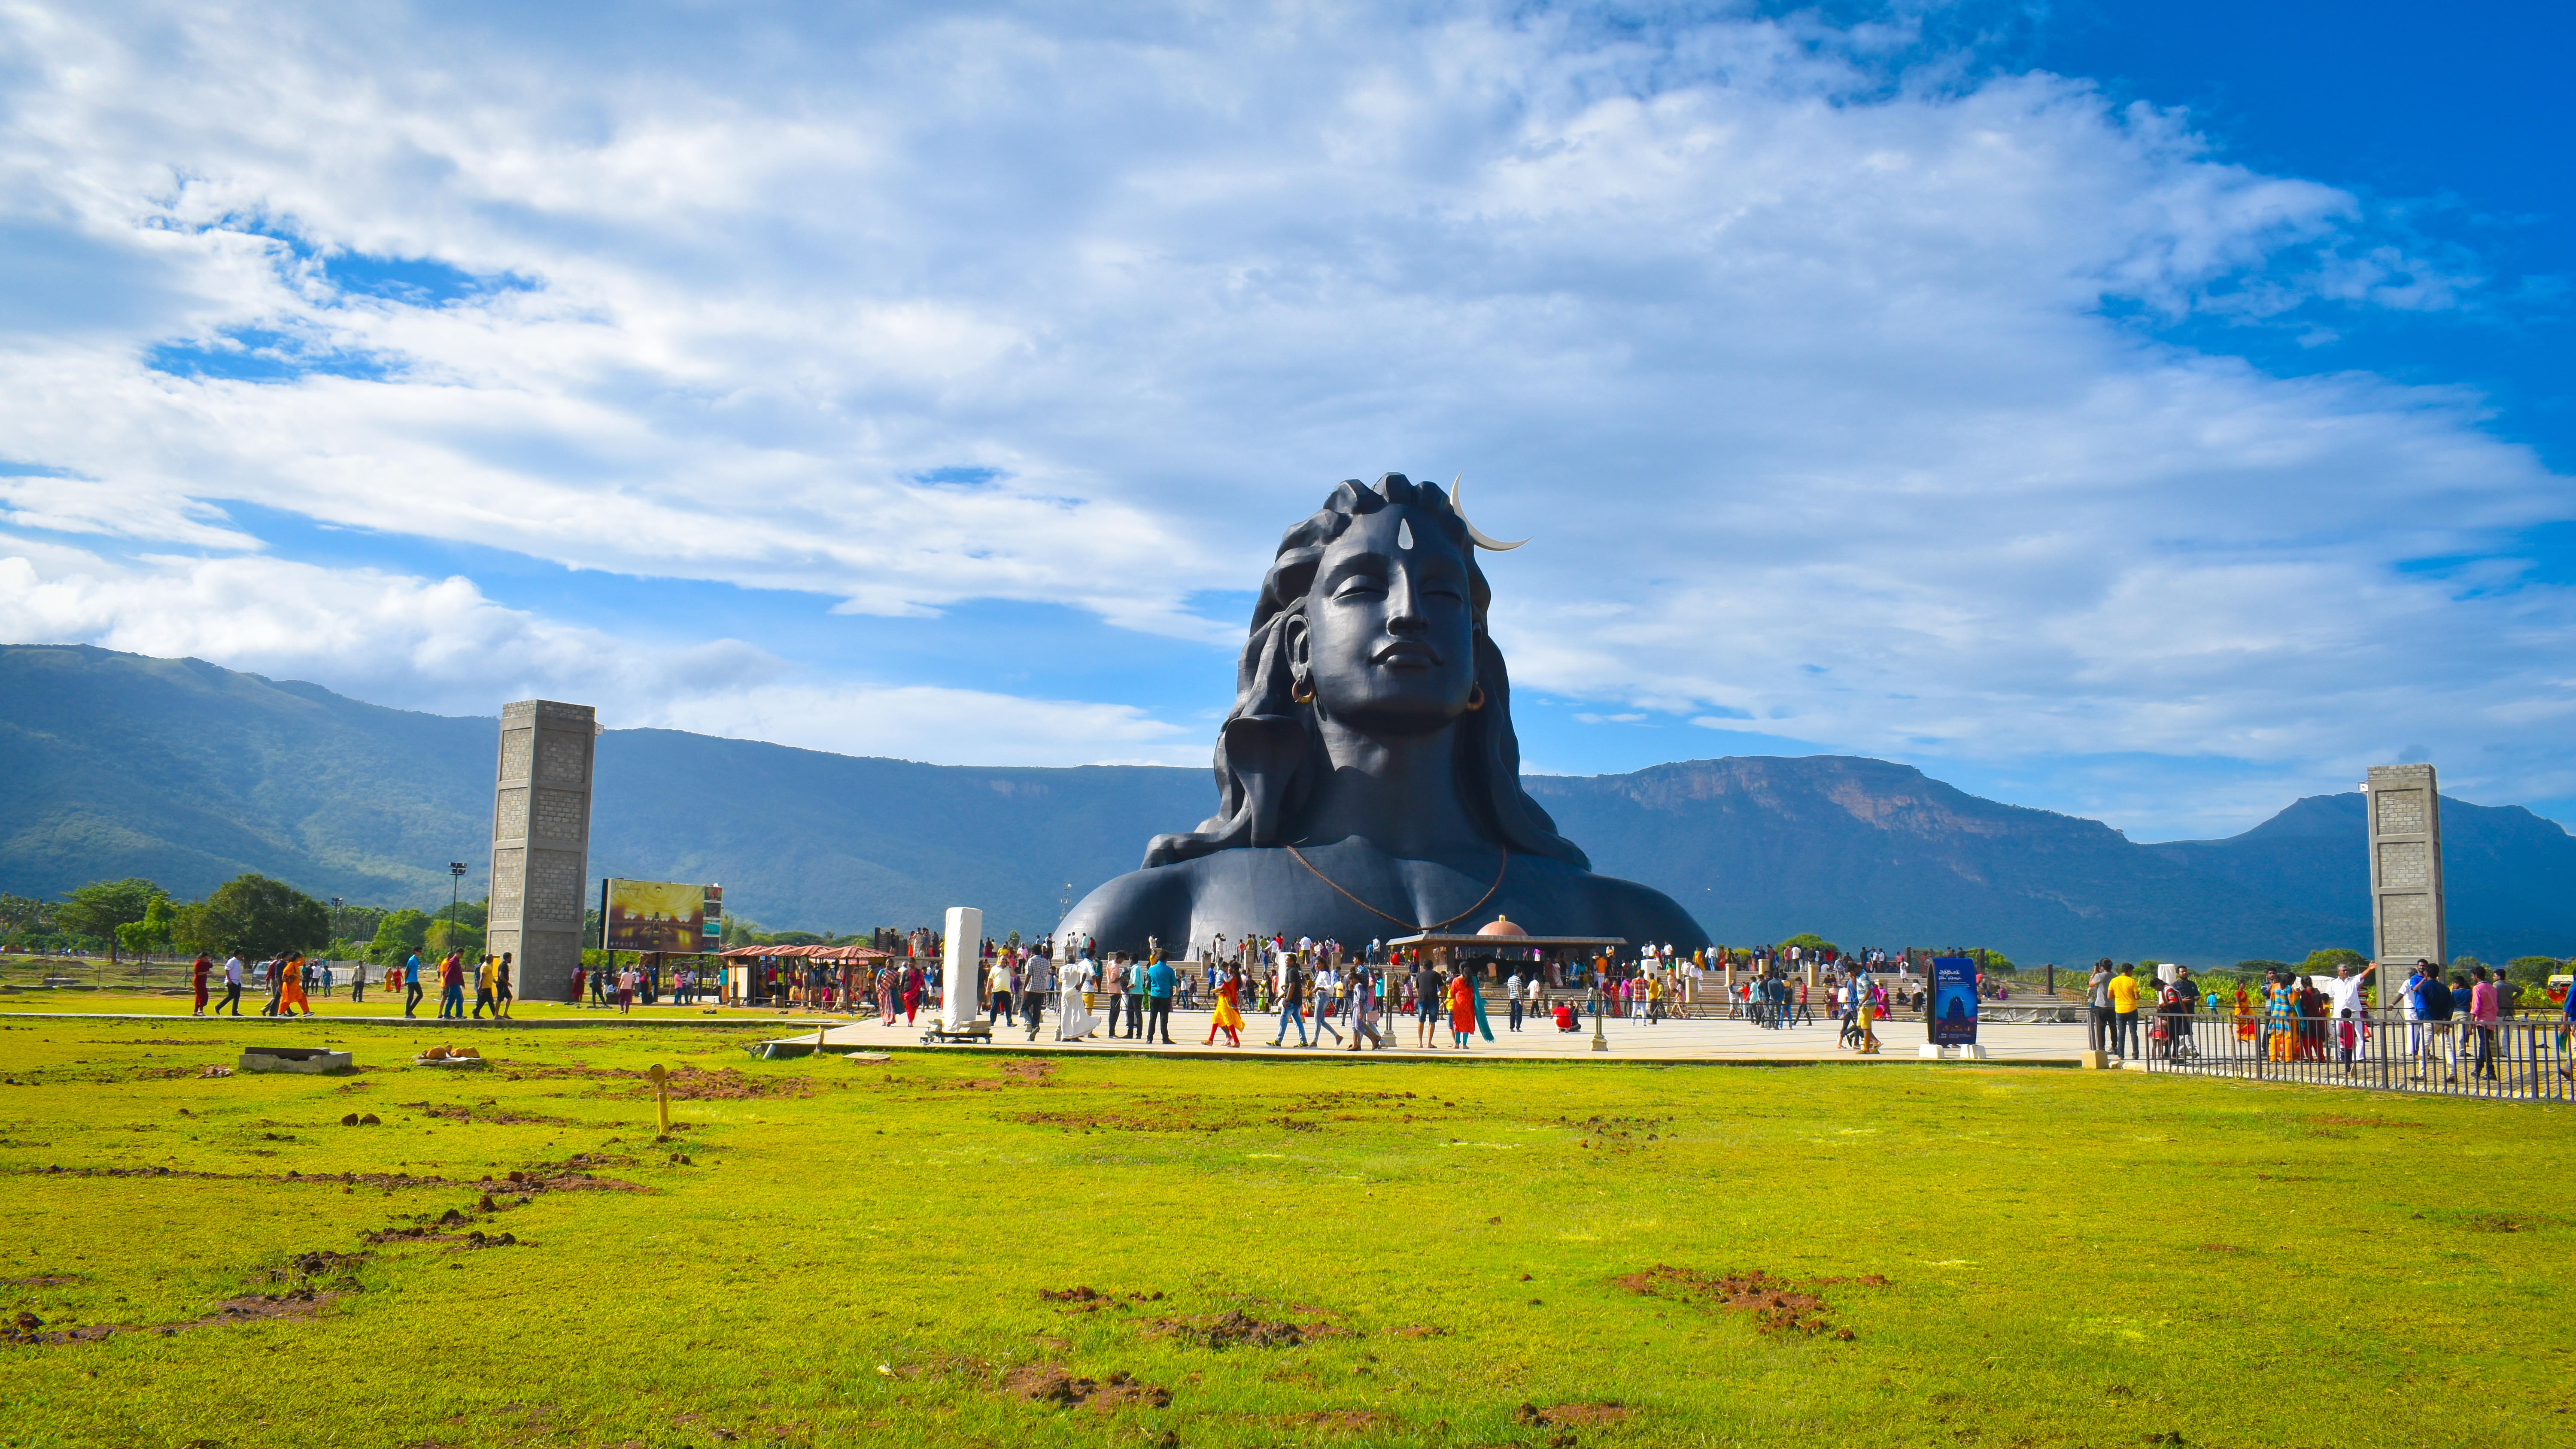 Tamil Nadu Packages from Gurgaon | Get Upto 40% Off